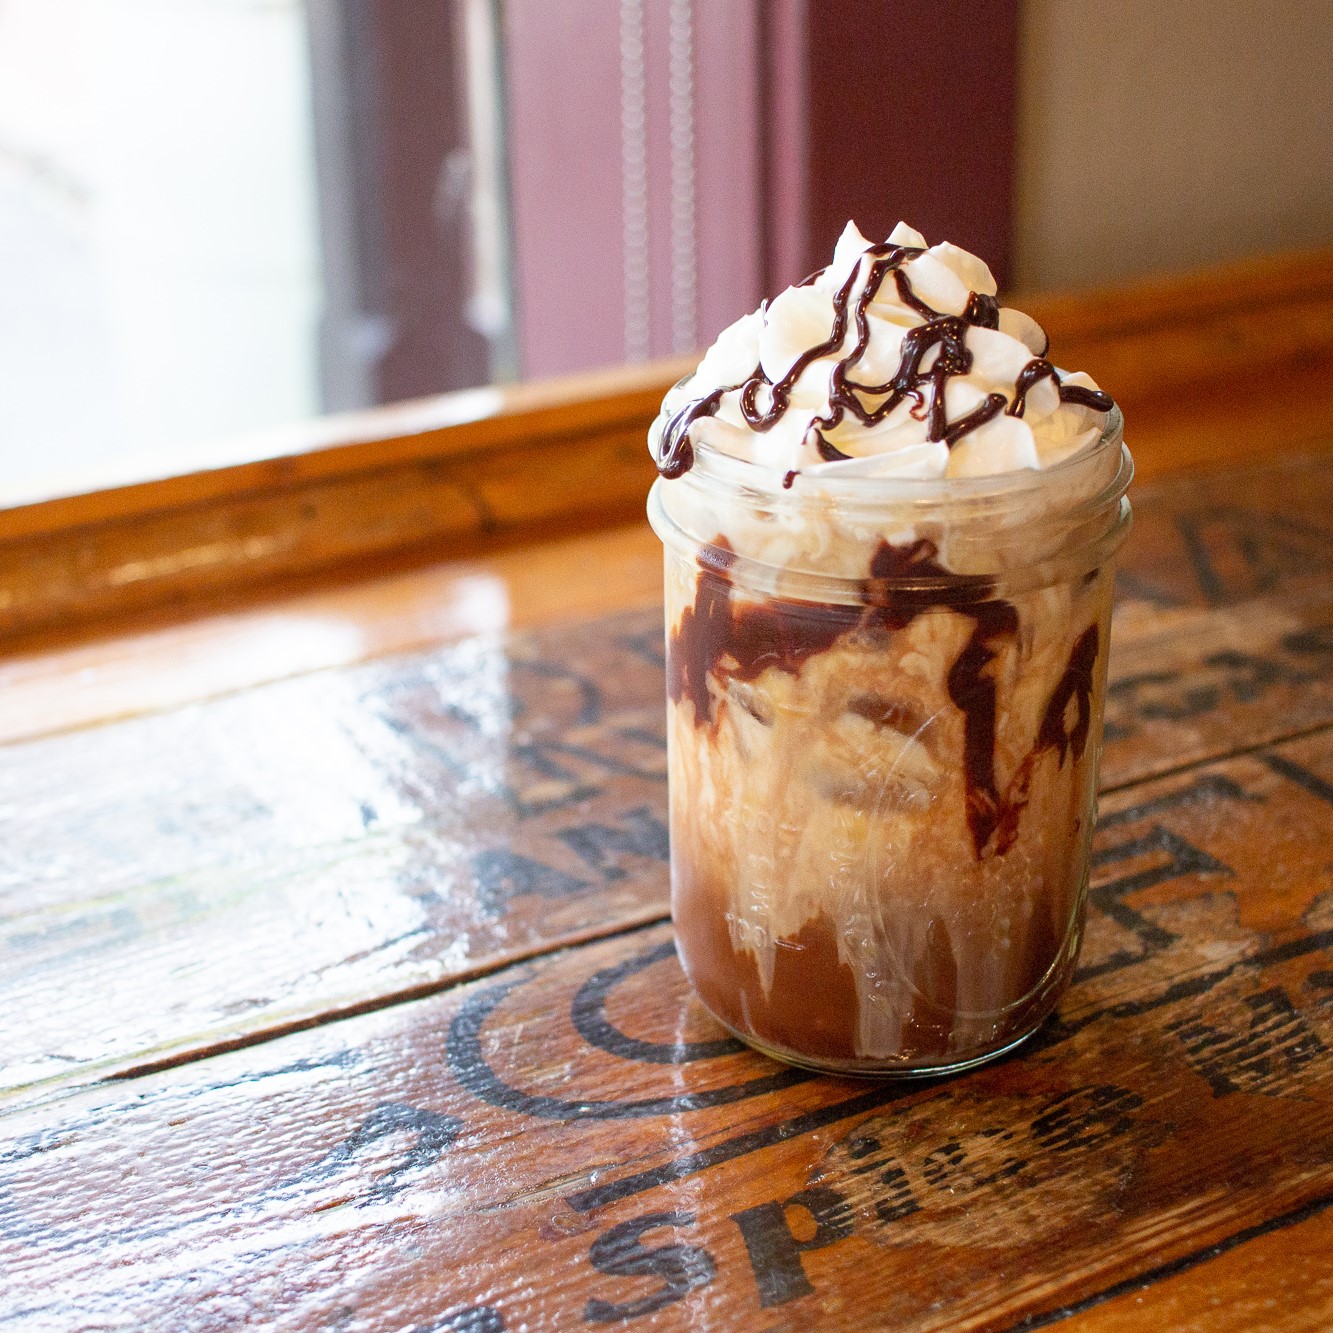 Iced coffee with whipped cream and chocolate sauce on a wooden table.